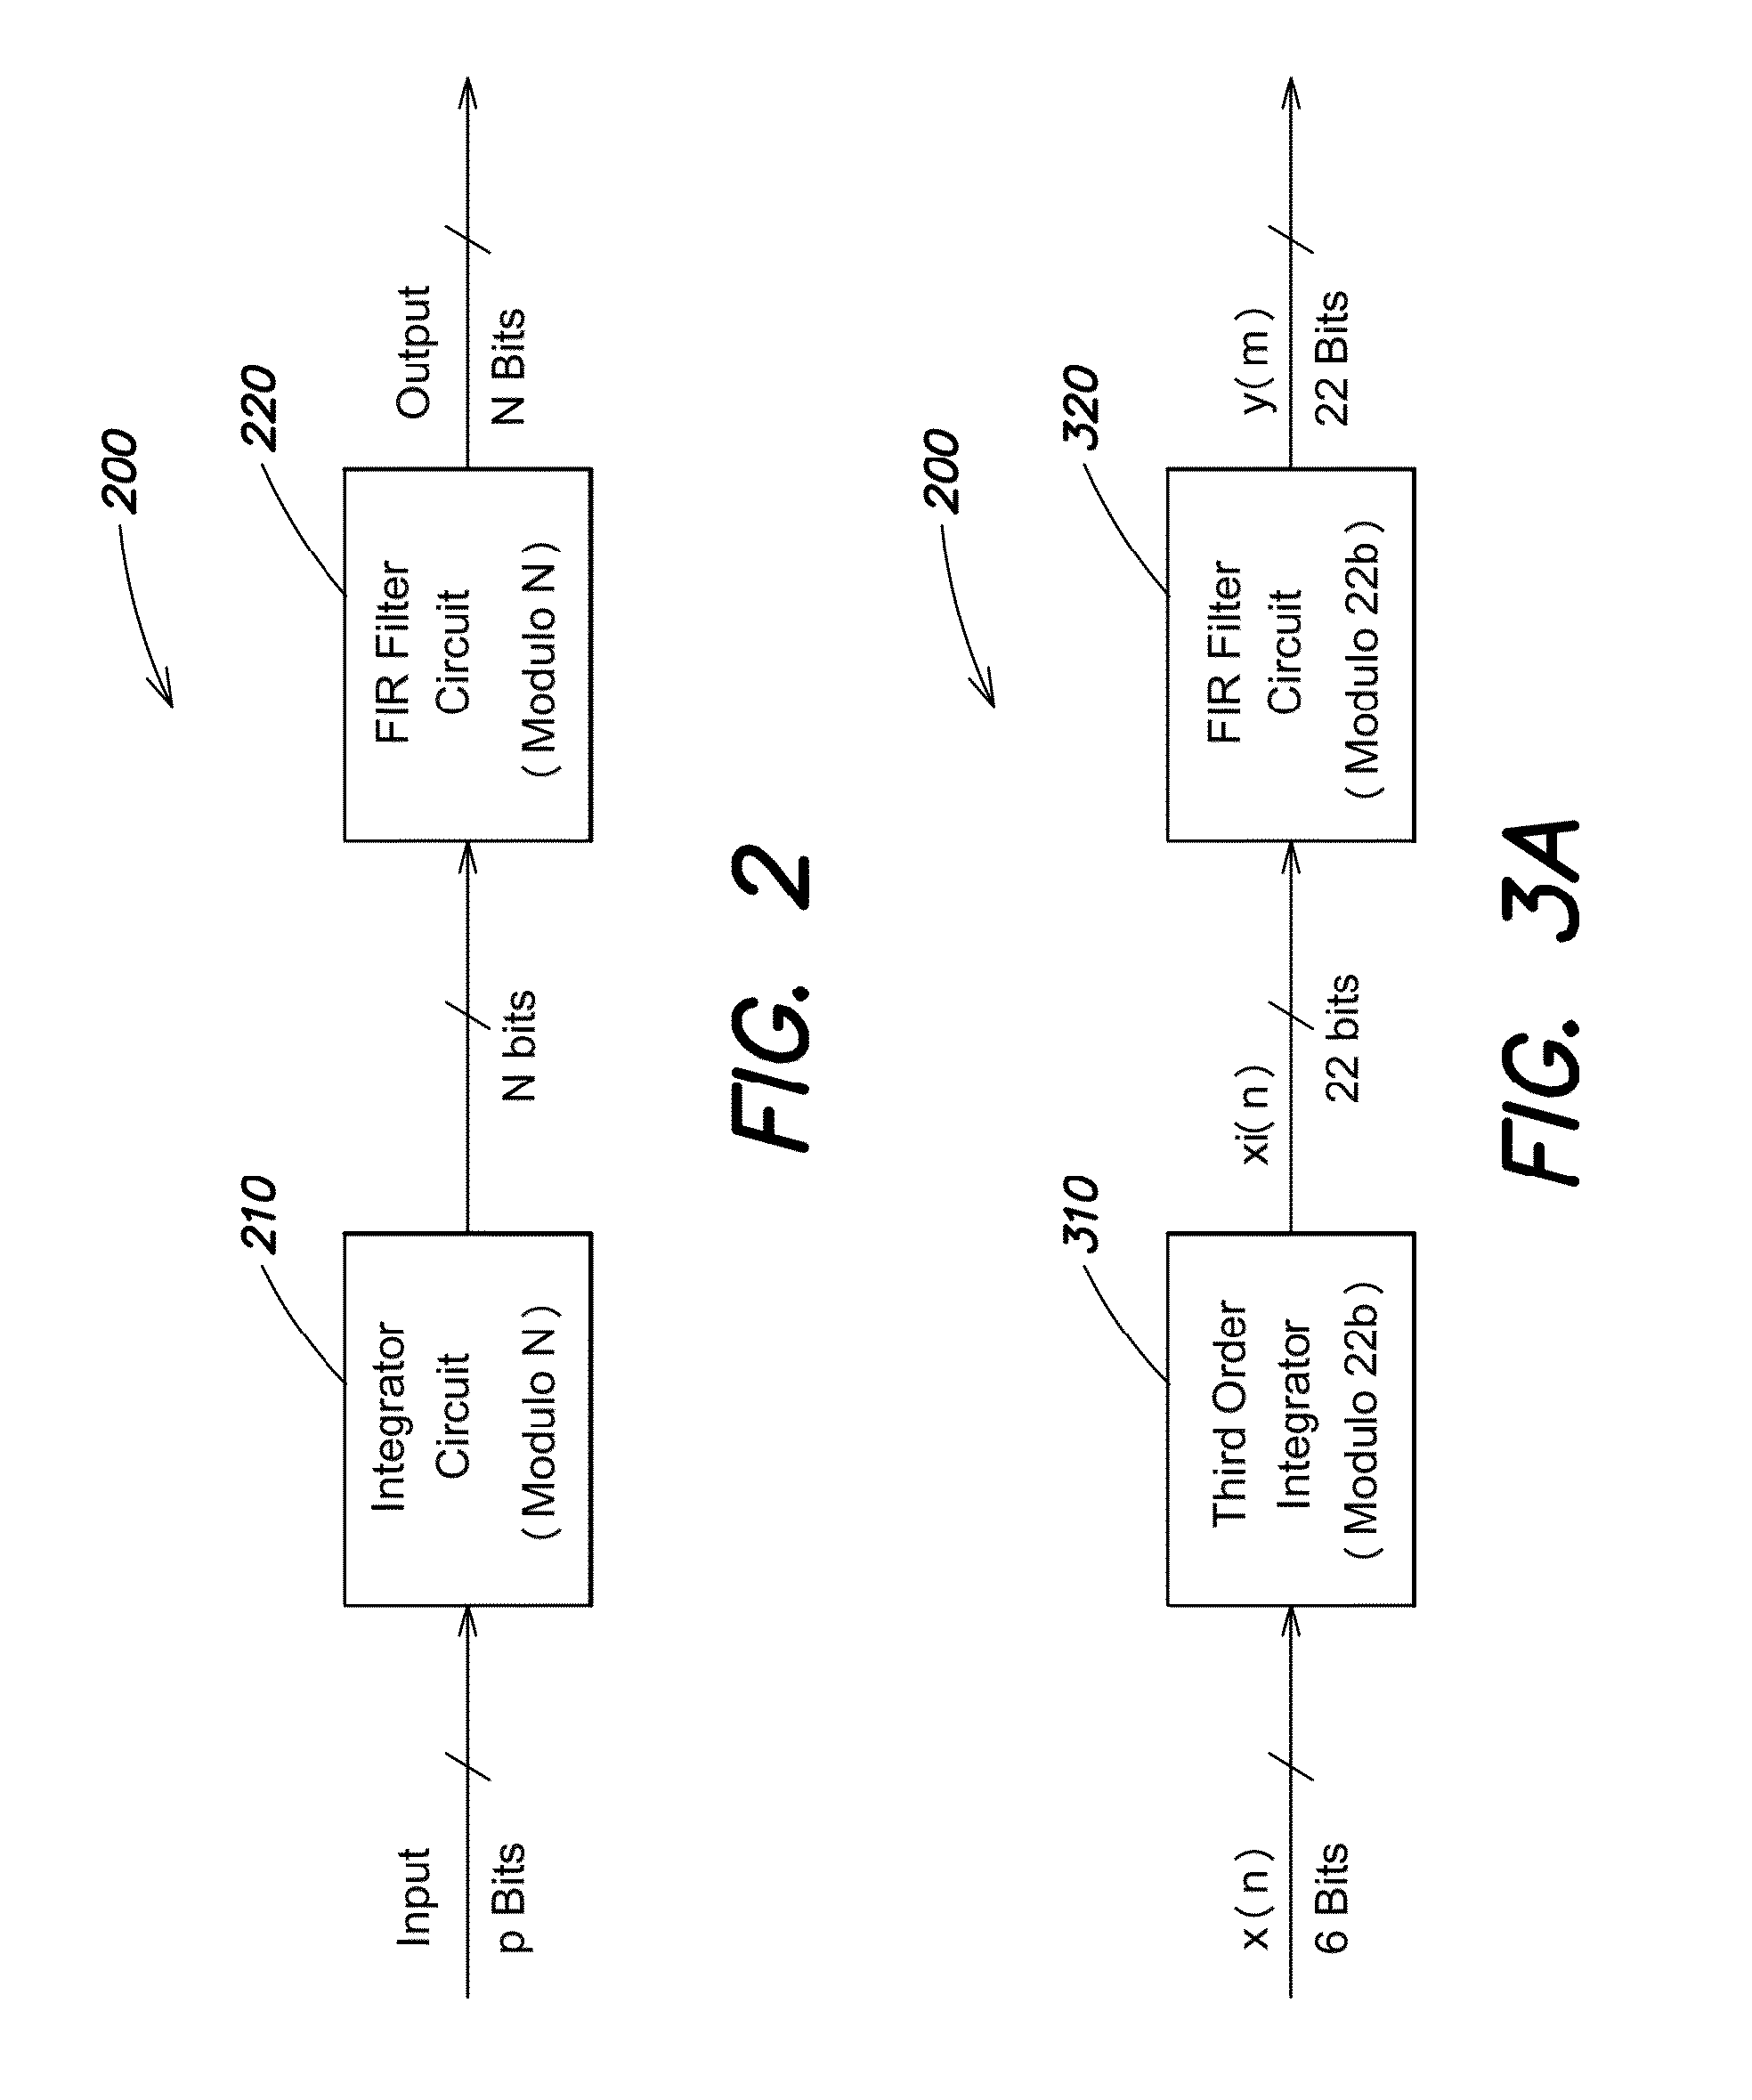 Polyphase decimation fir filters and methods